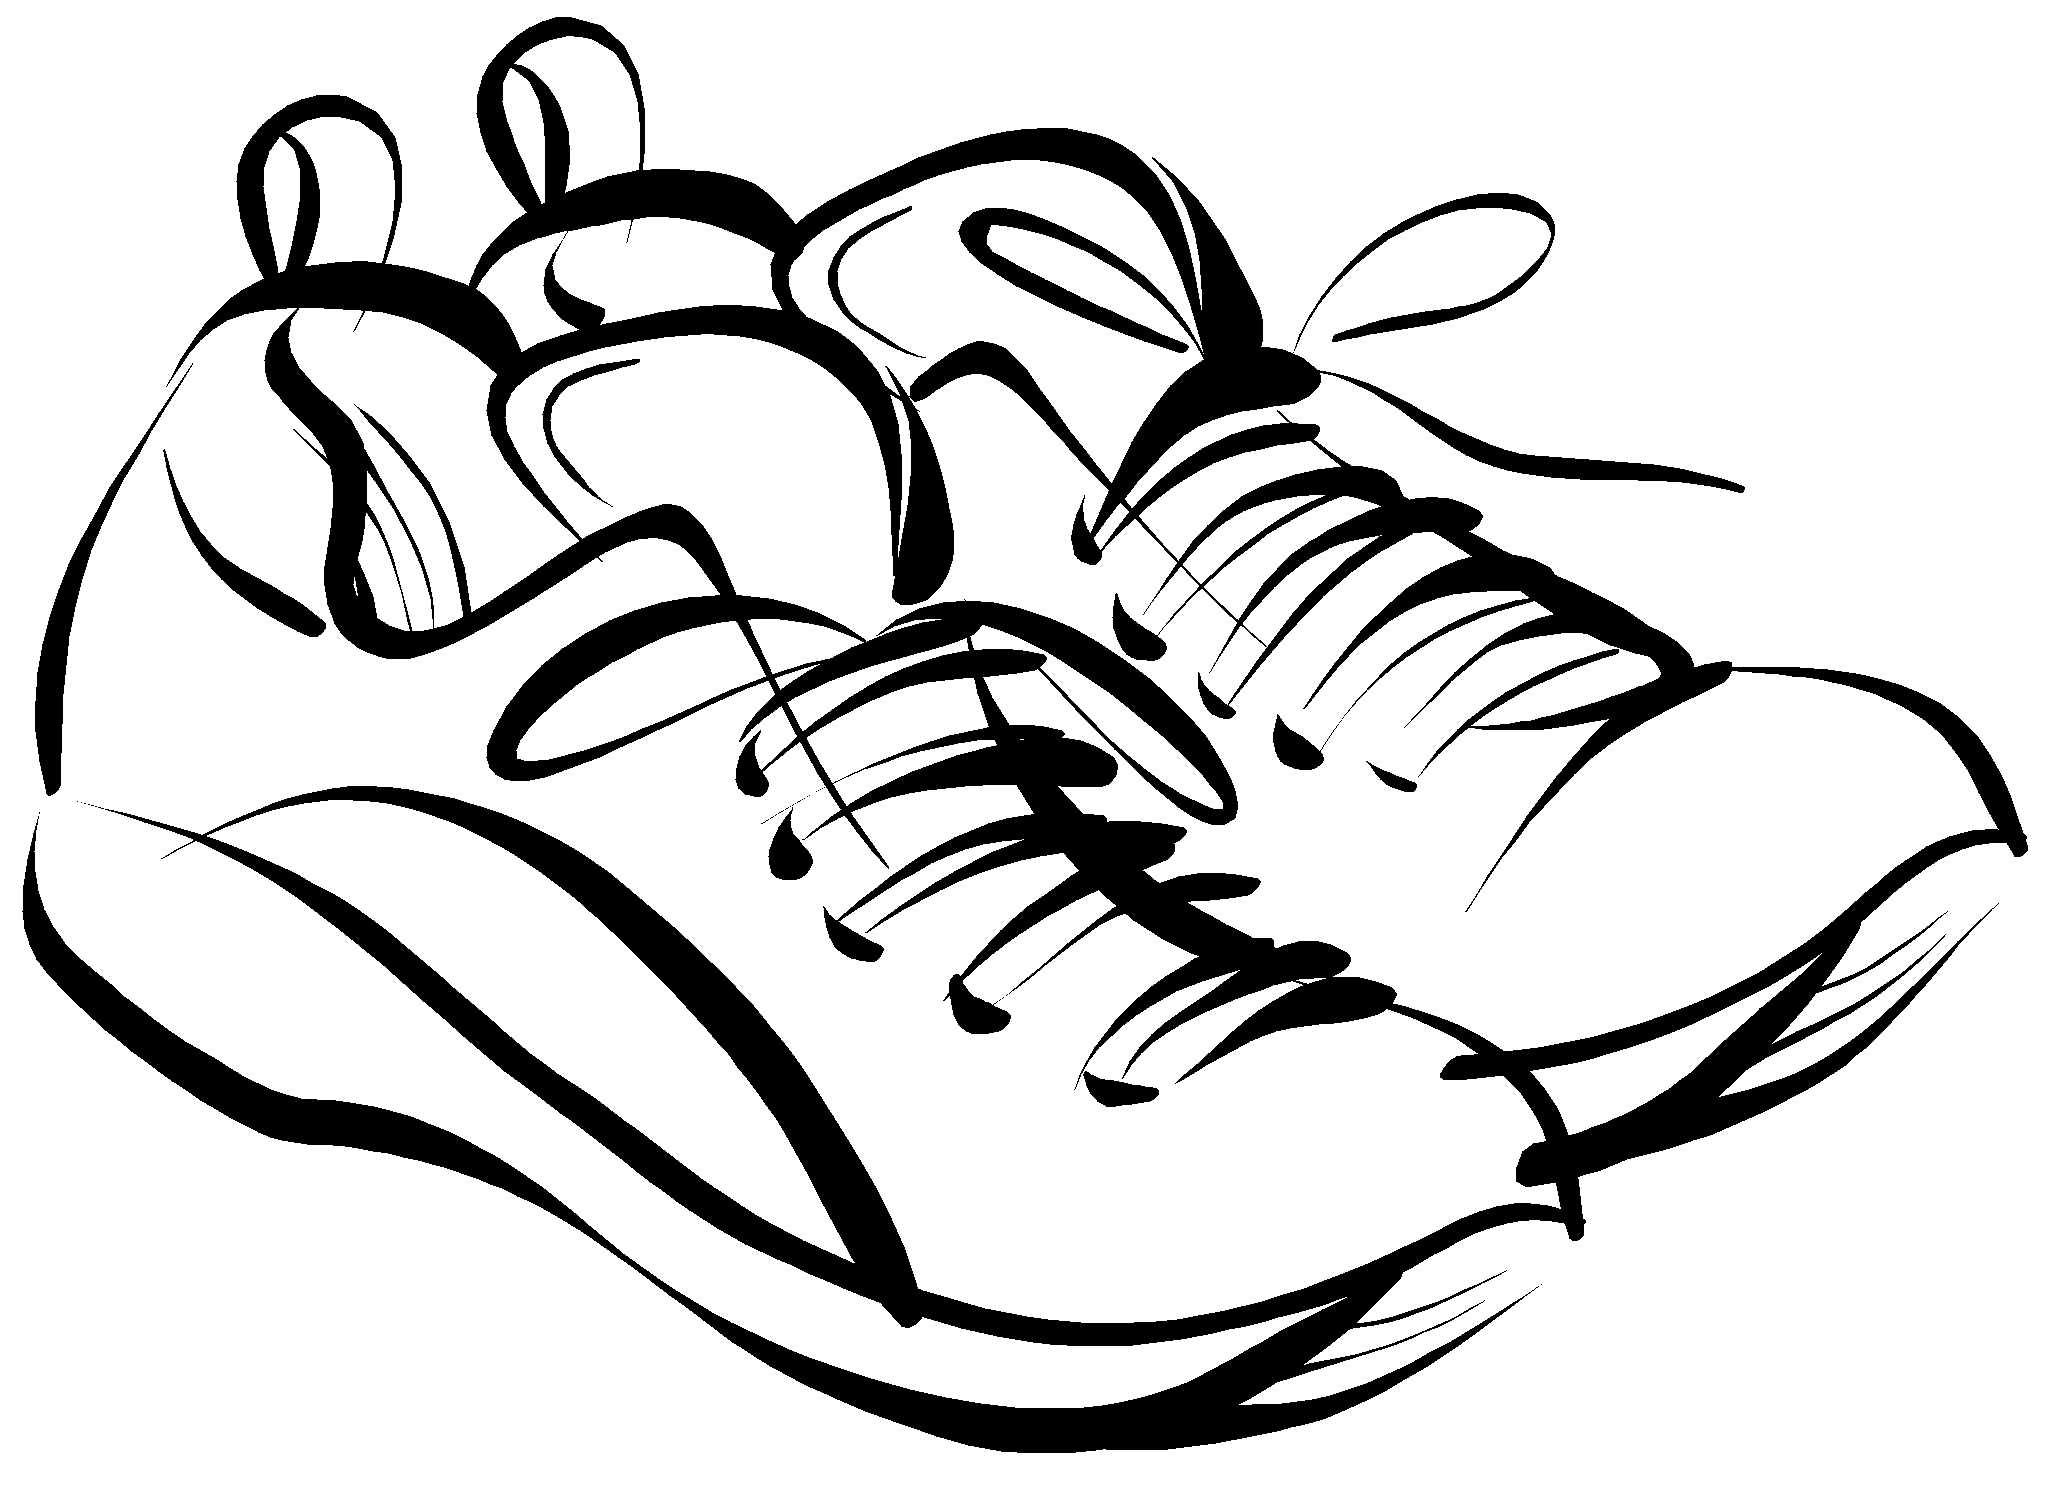 Running Shoes Drawing - Free Clipart Images - ClipArt Best - ClipArt Best